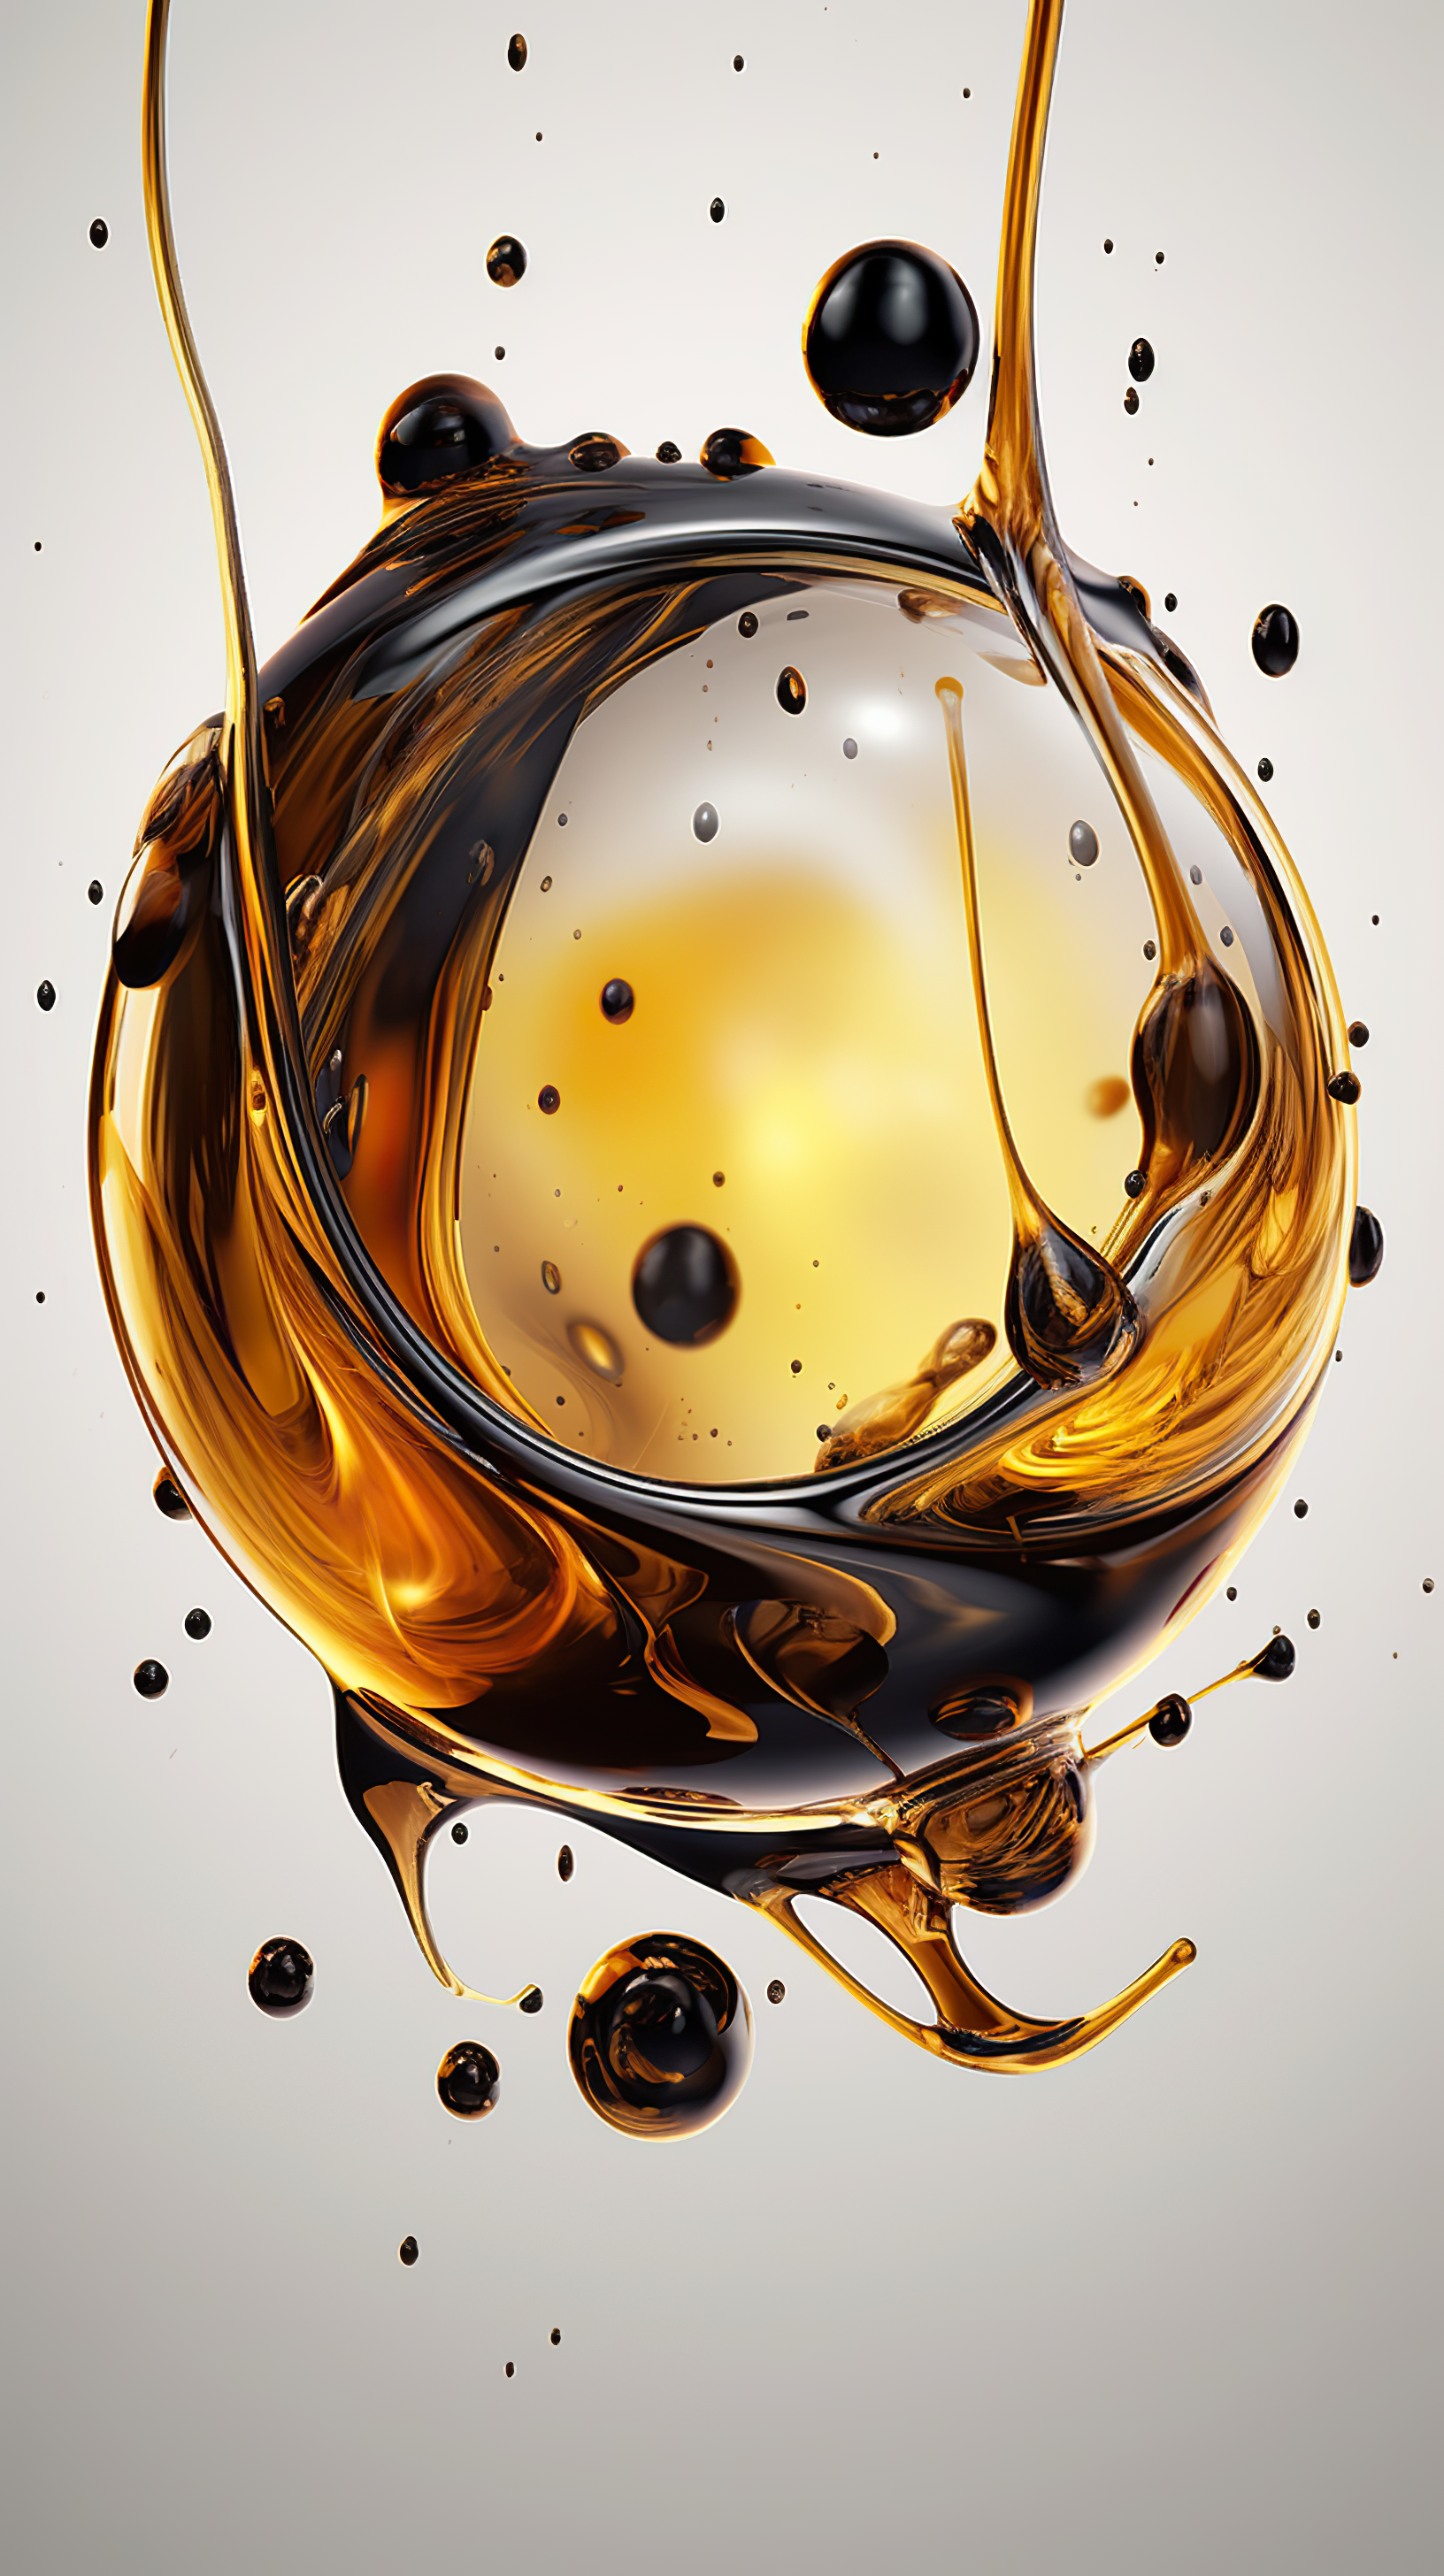 Olive or engine oil swirling on white background